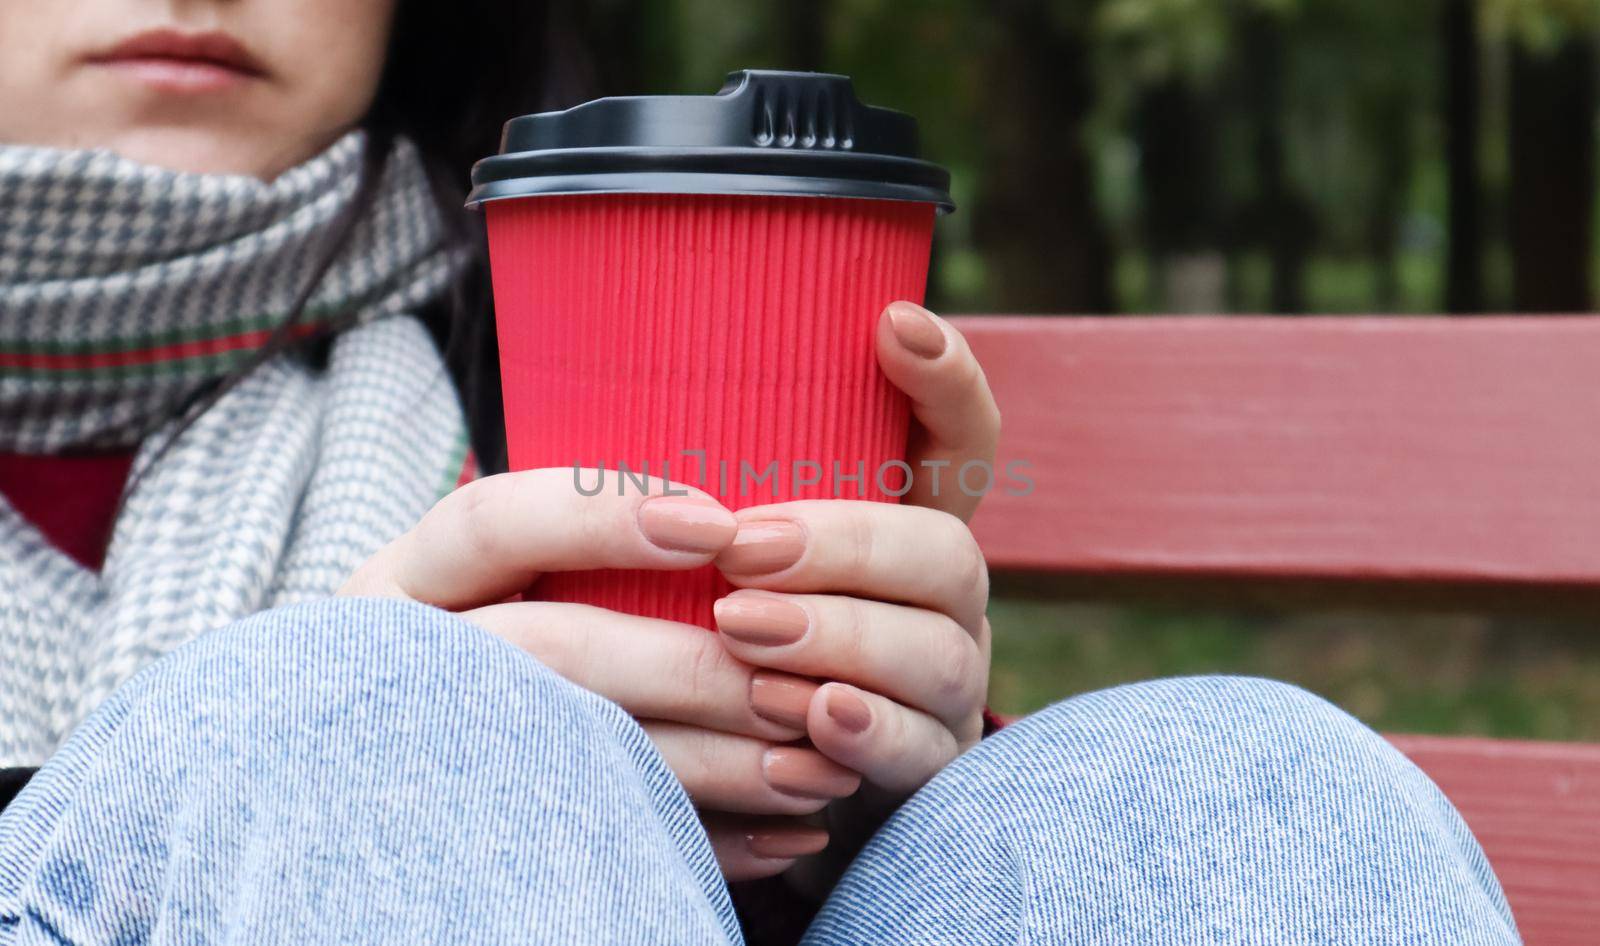 Young stylish woman in a coat and scarf drinks morning hot coffee in a red eco paper glass outdoors in an autumn park. Close-up of a young woman holding a takeaway coffee cup, shallow depth of field.